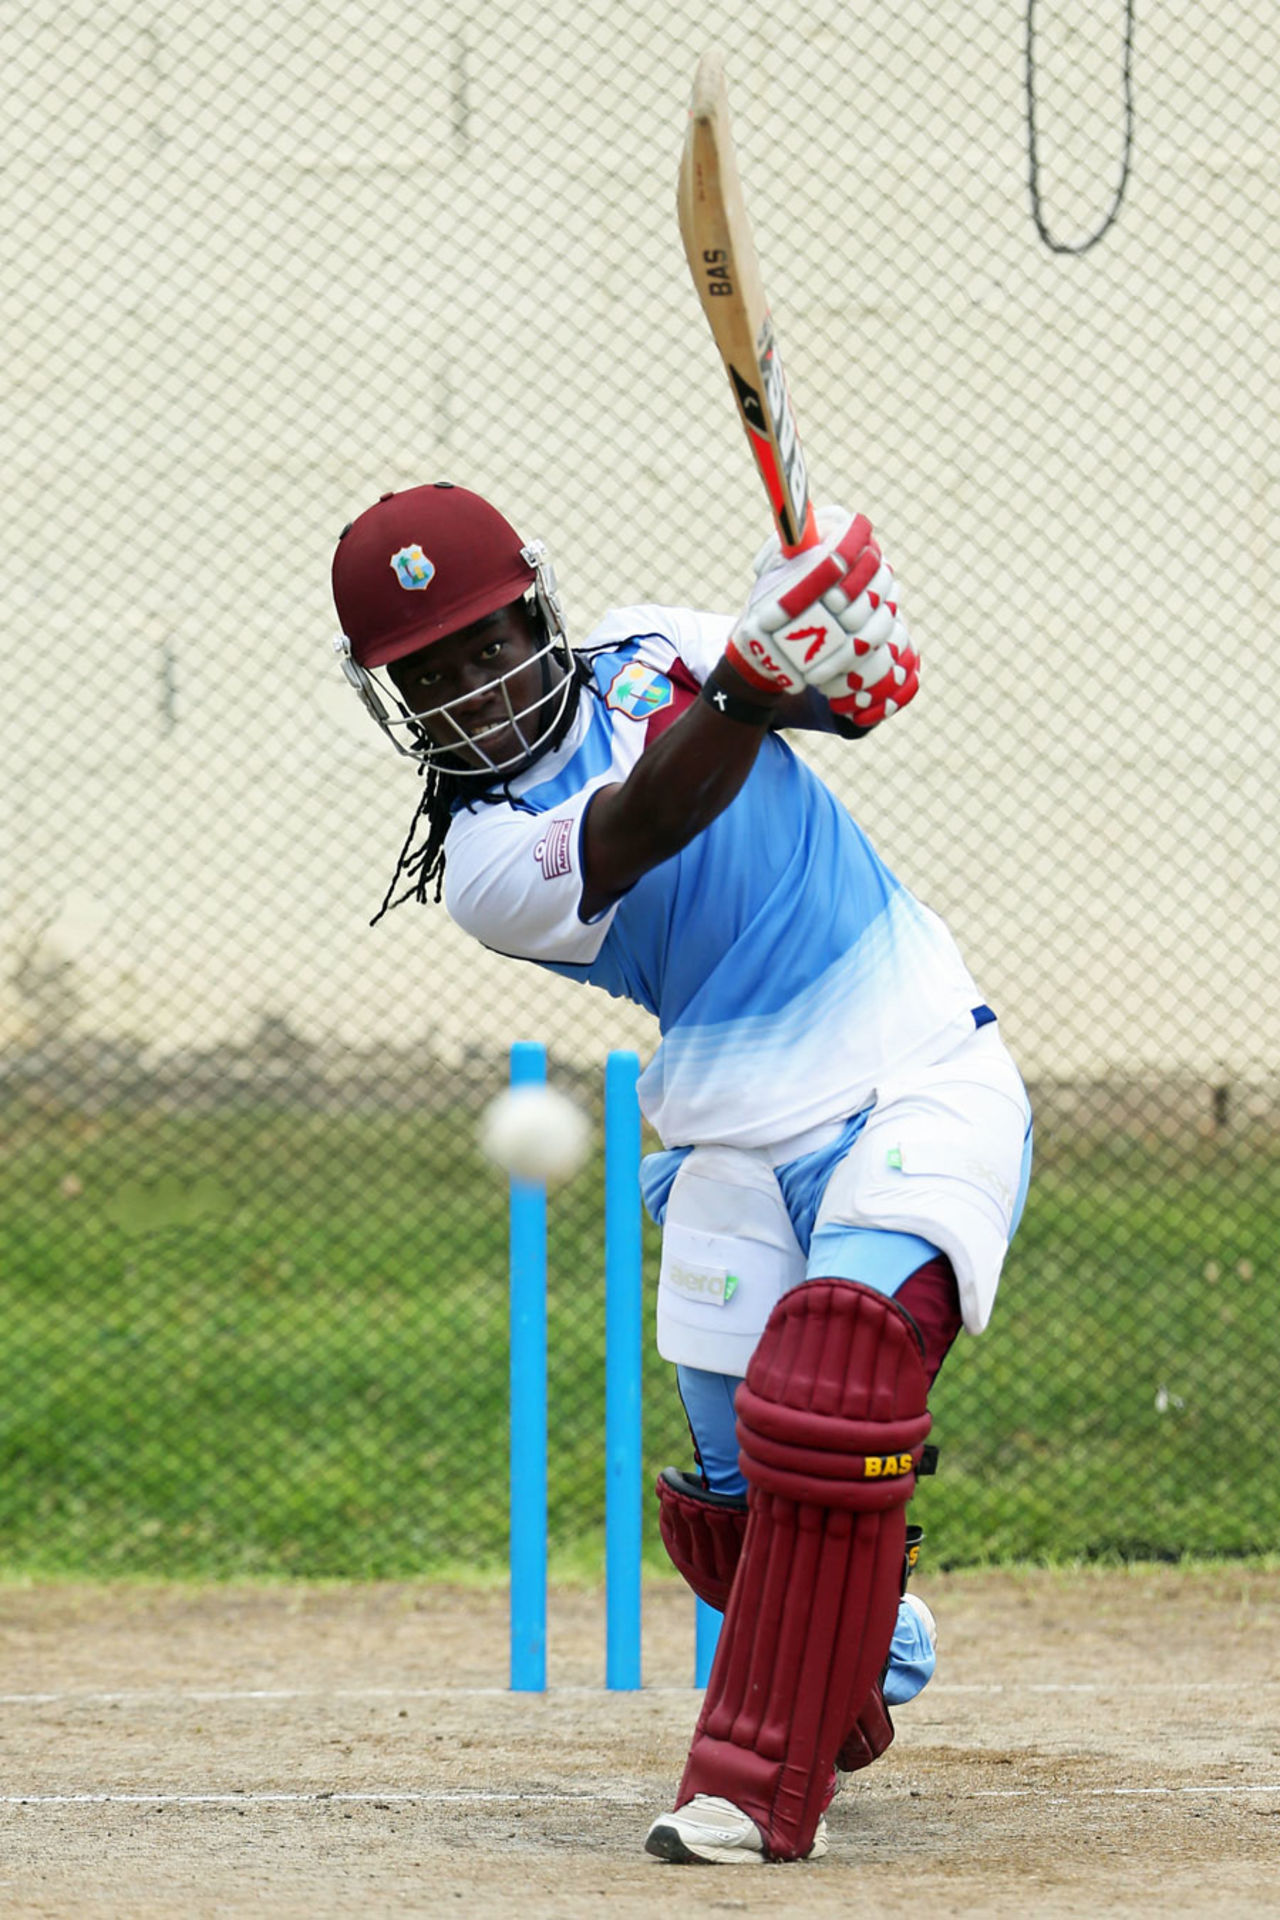 Deandra Dottin bats in the nets on the eve of the first ODI against New Zealand Women, Basseterre, September 11, 2014